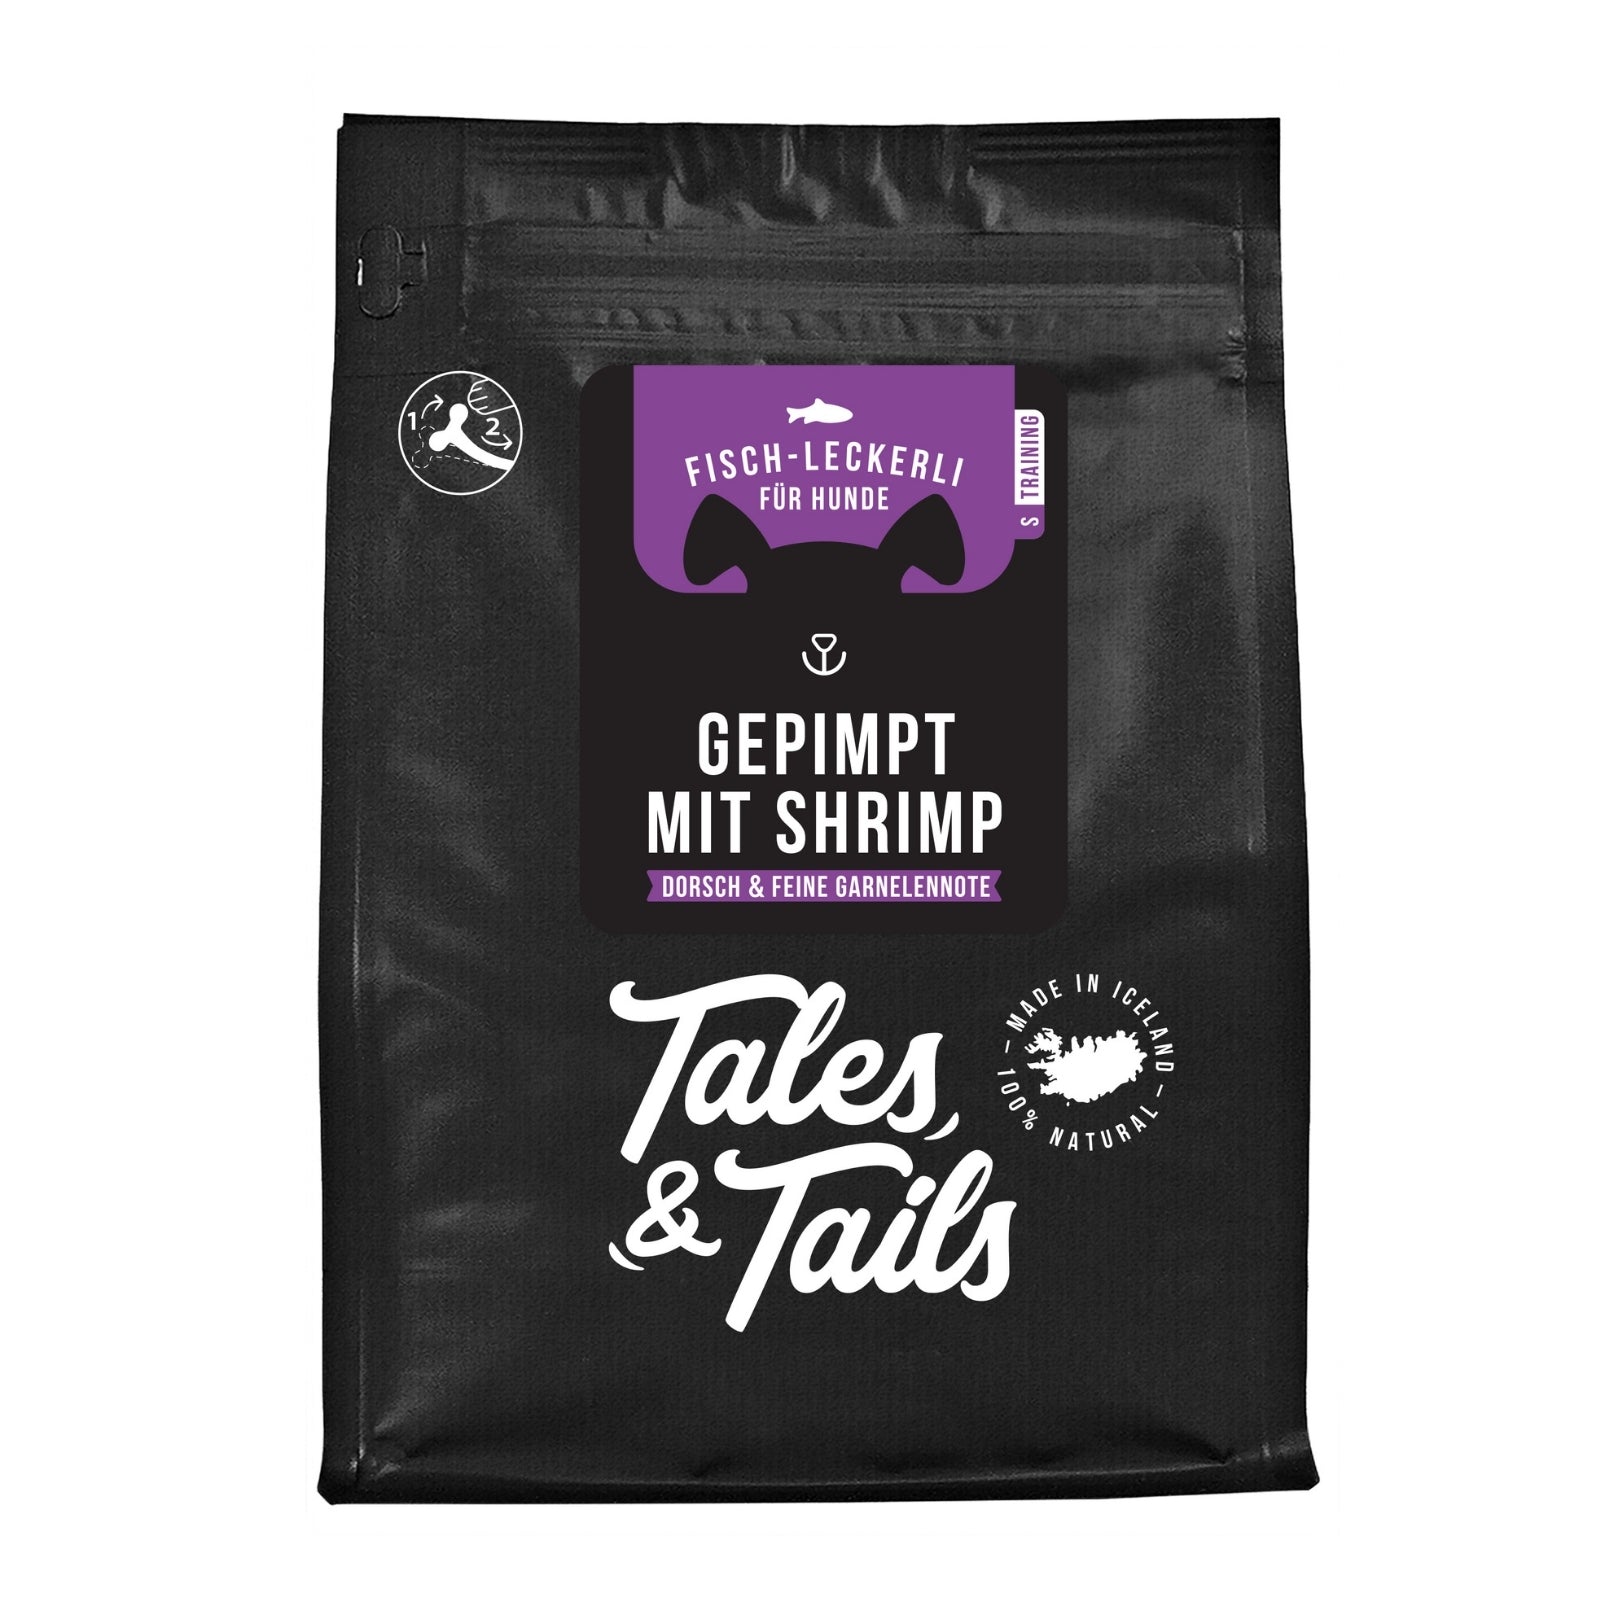 Tales & Tails Leckerli mit Shrimps Packung